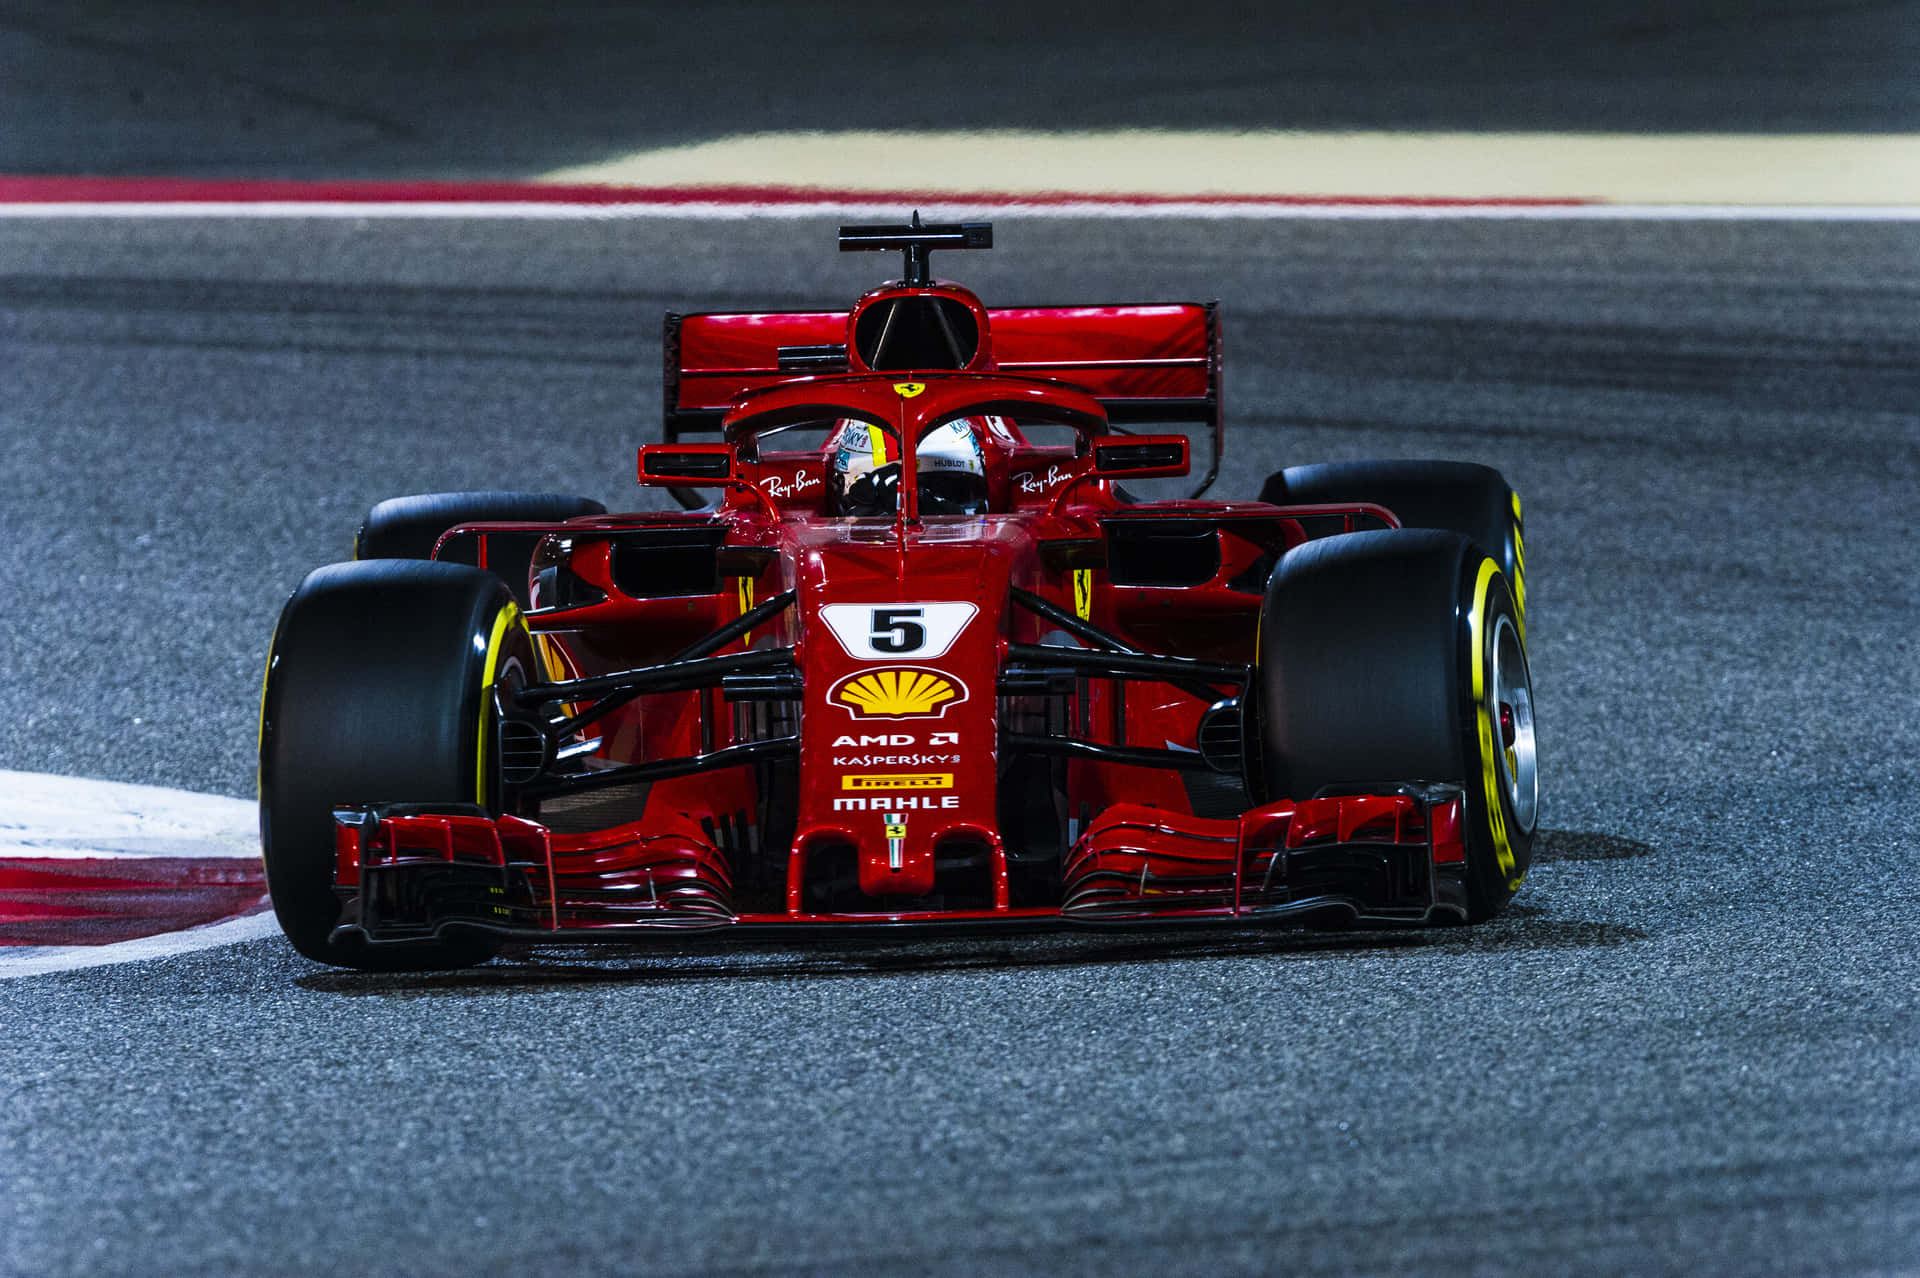 In pictures: Carlos Sainz testing with the Ferrari SF71H in Fiorano today